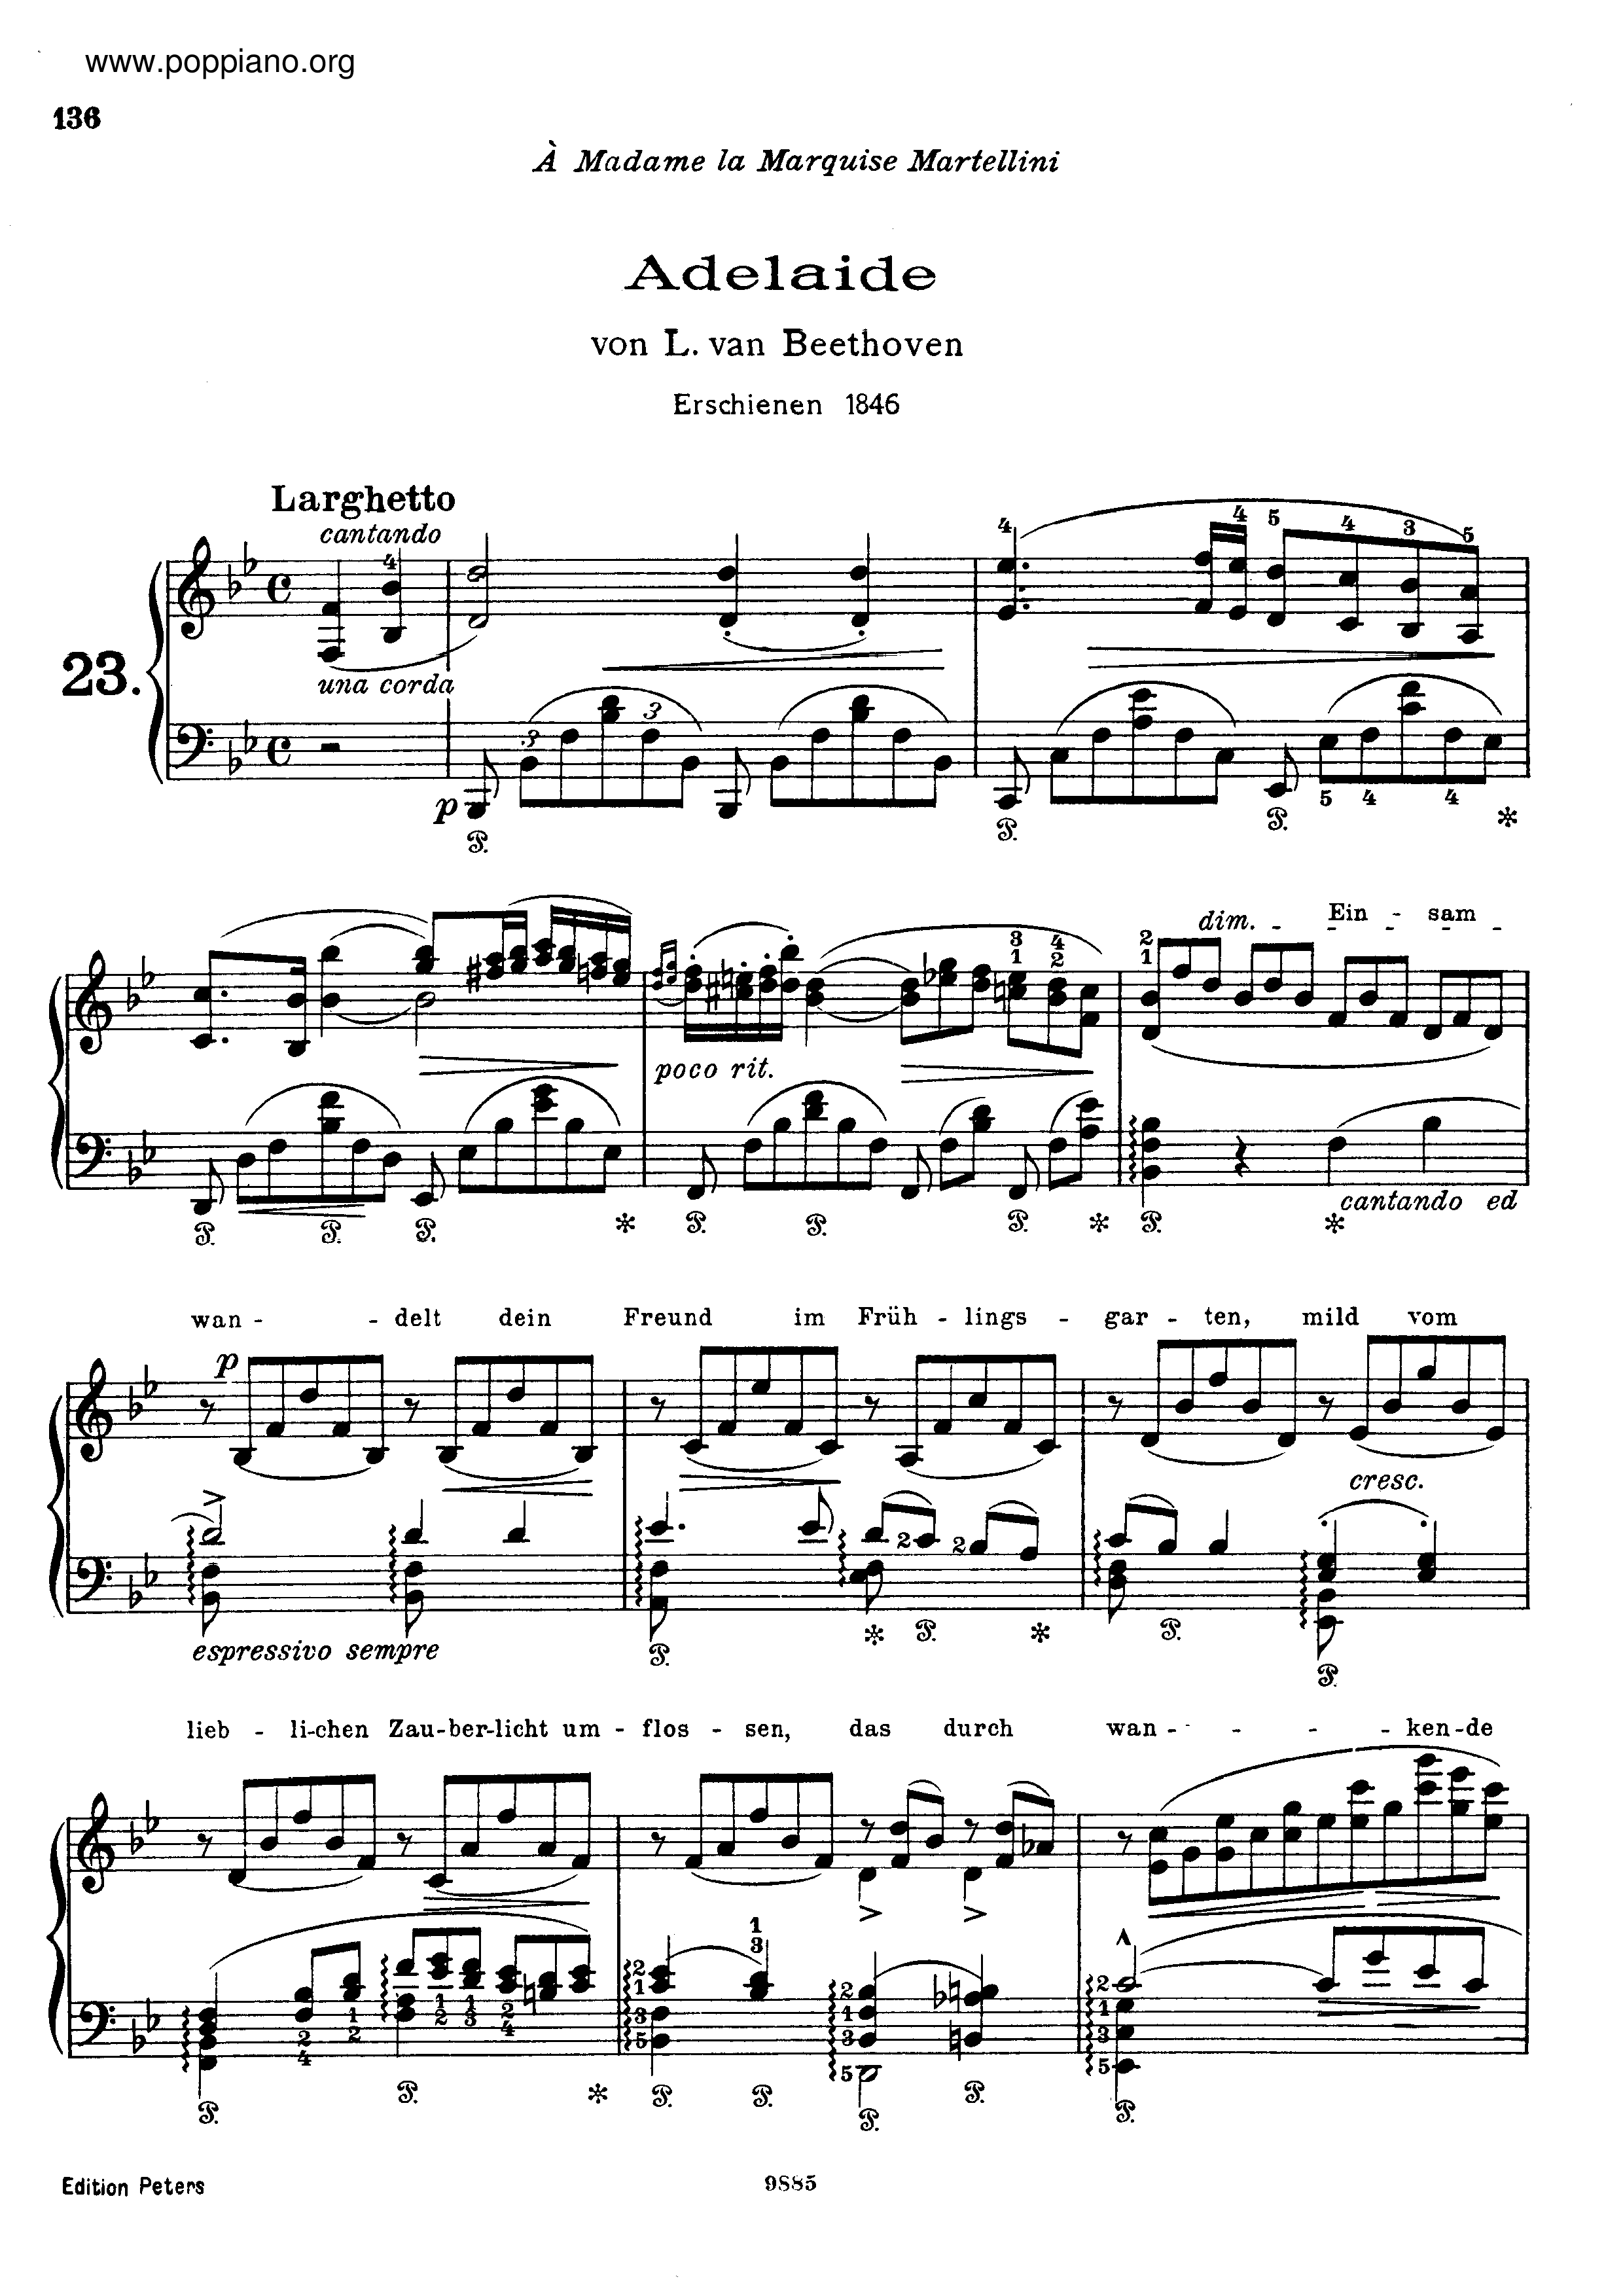 Adelaude, by Beethoven, S.466 Score